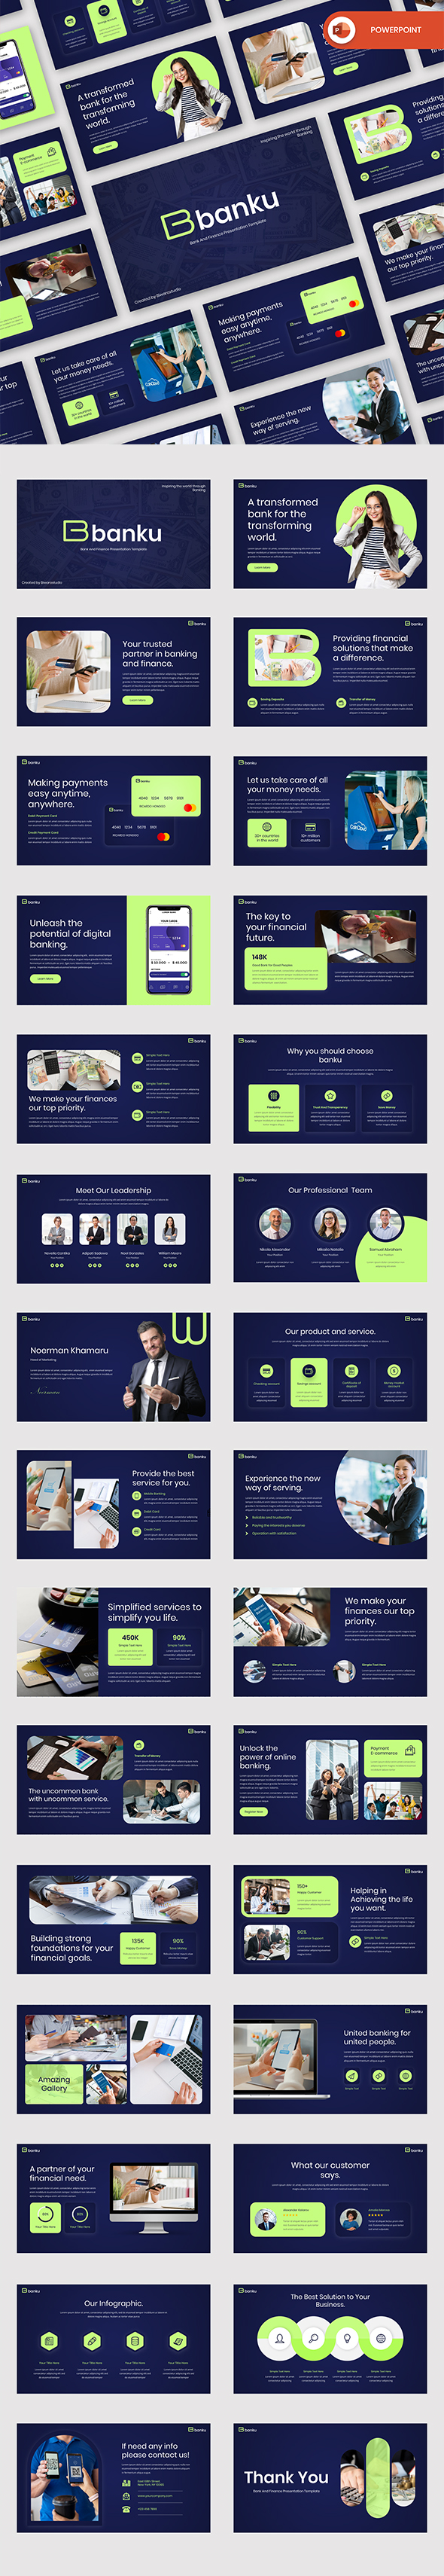 Banku - Banking And Finance PowerPoint Template